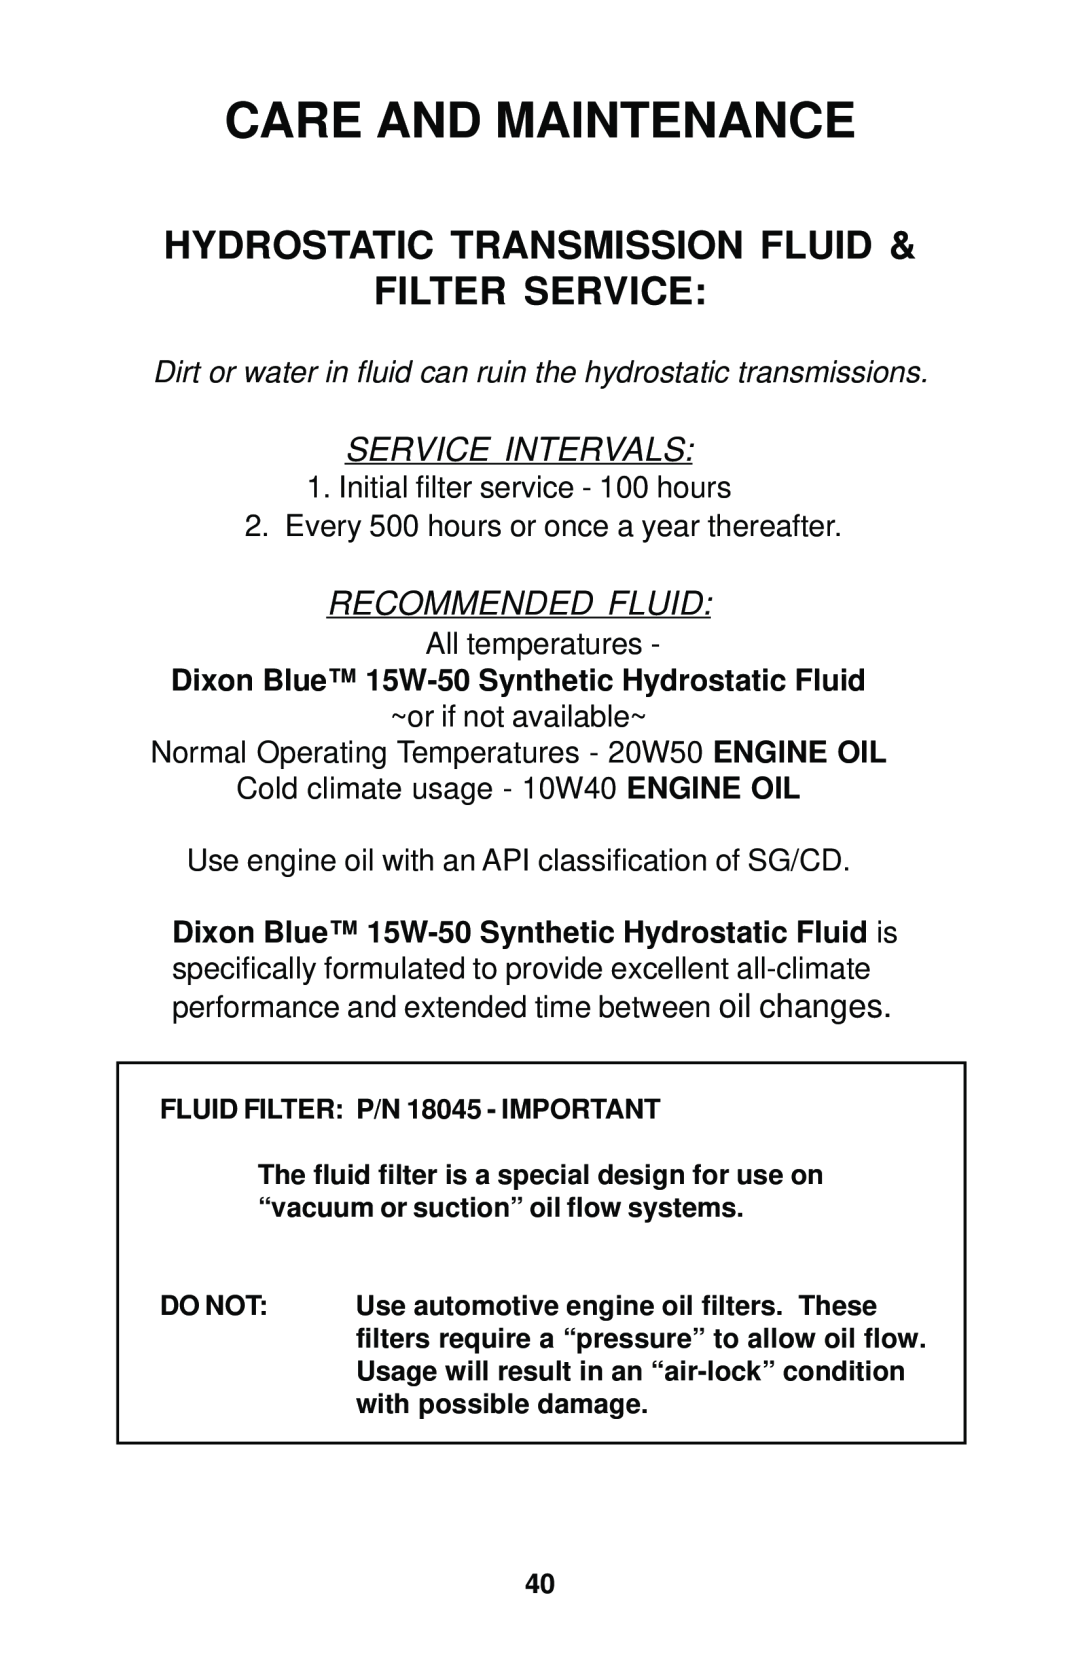 Dixon 12881-1104 Hydrostatic Transmission Fluid Filter Service, Care And Maintenance, Service Intervals, Recommended Fluid 